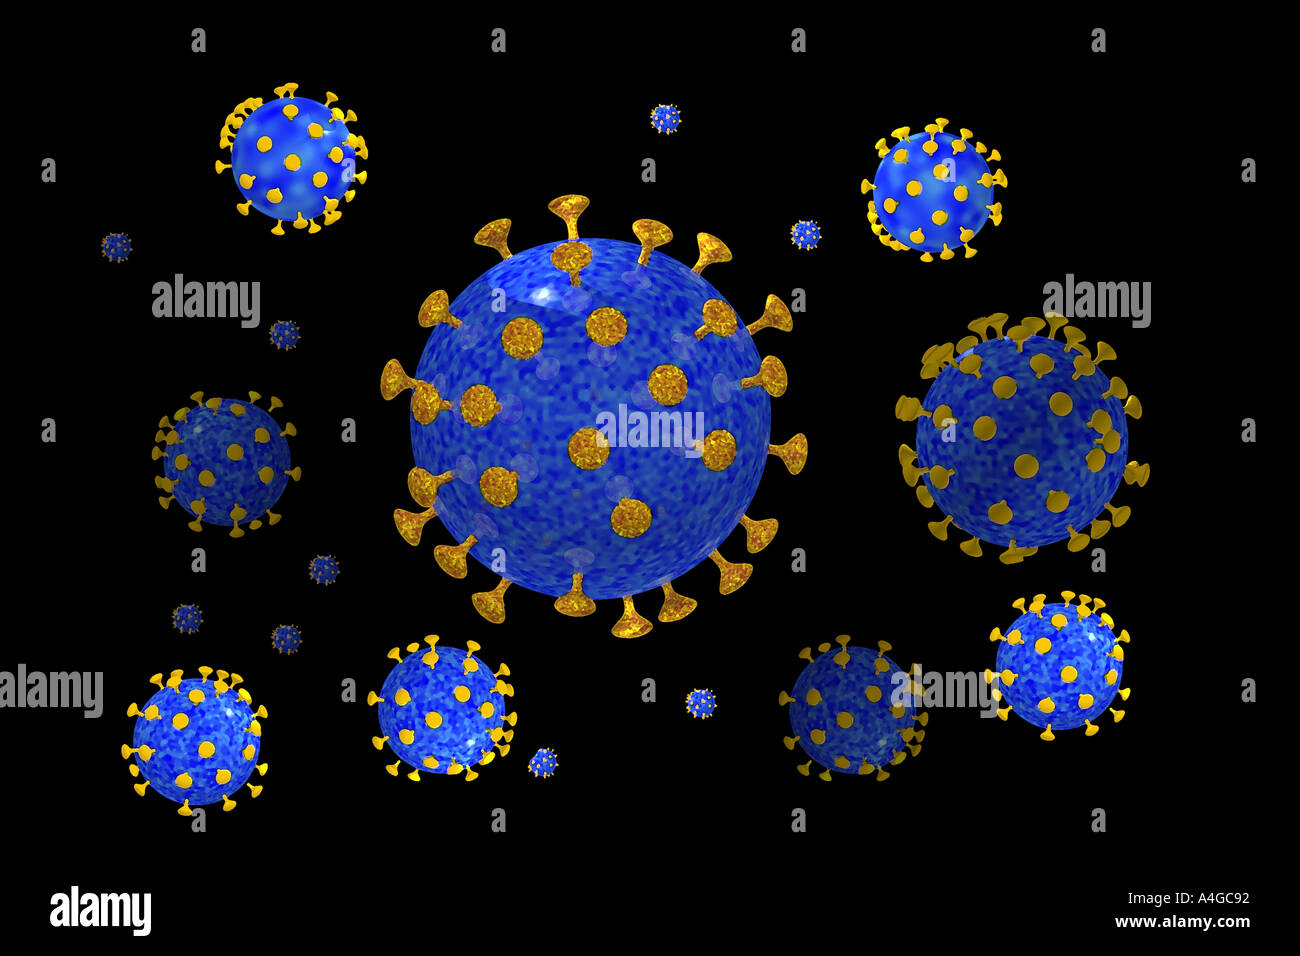 Model of HIV human immunodeficiency virus particles showing the surface of the virus coated with glycoprotein knobs  Stock Photo